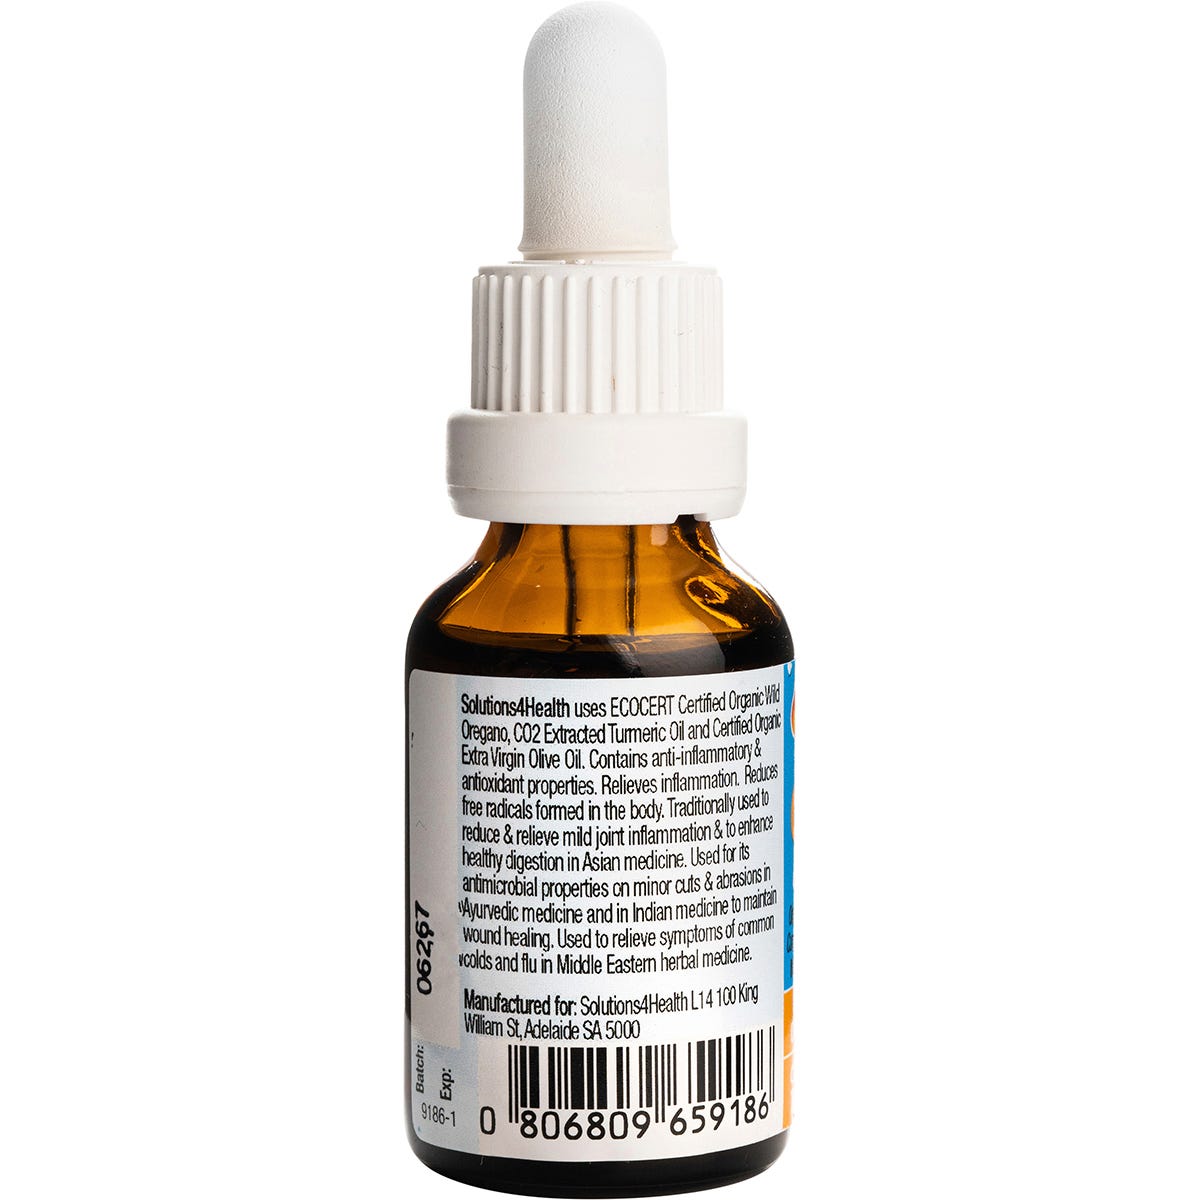 Solutions 4 Health Oil of Wild Oregano with Turmeric Oil 25ml - Dr Earth - Immune Support